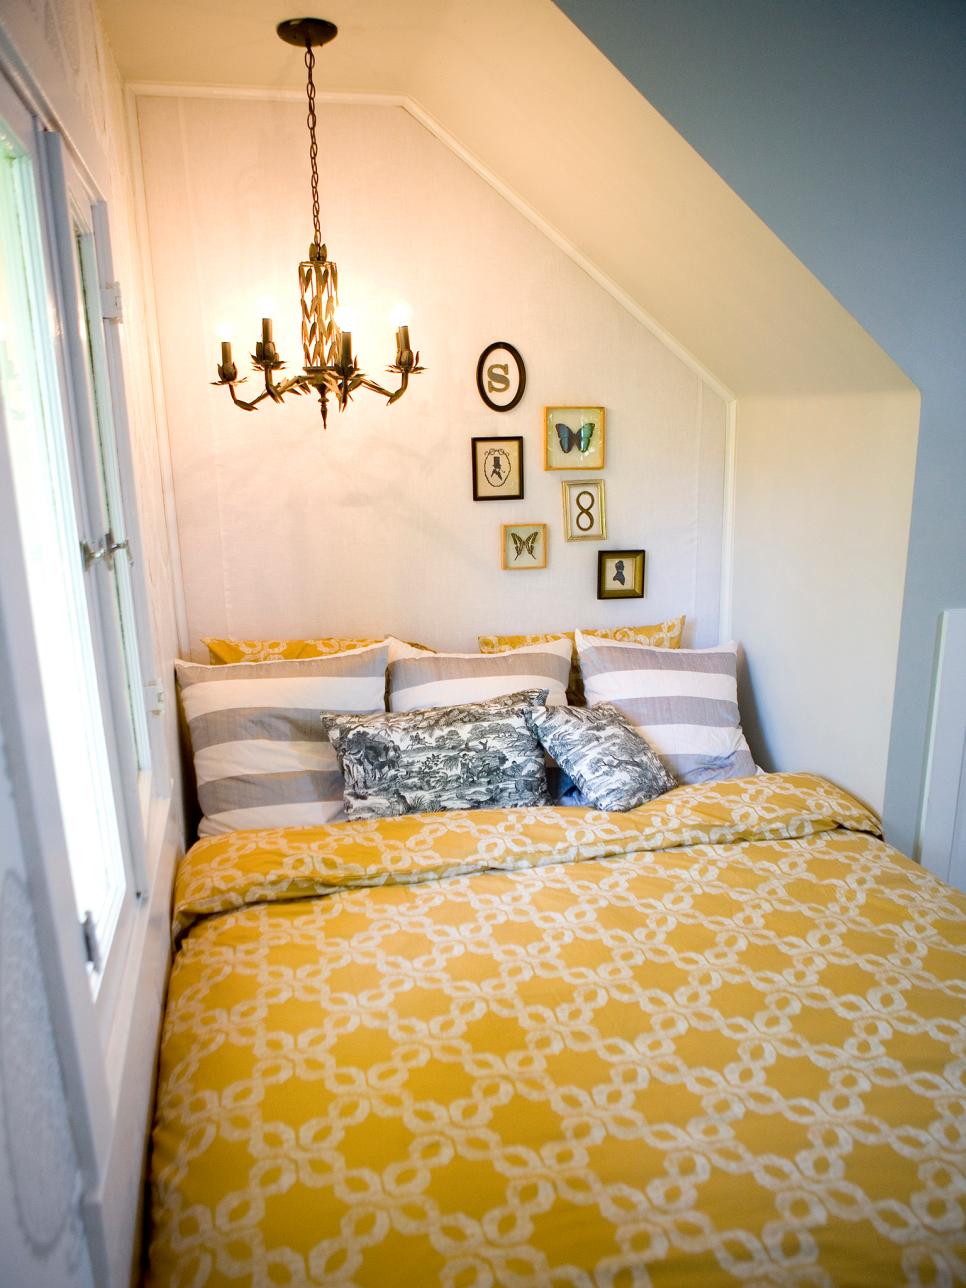 Small Guest Bedroom Nook With Yellow Patterned Duvet